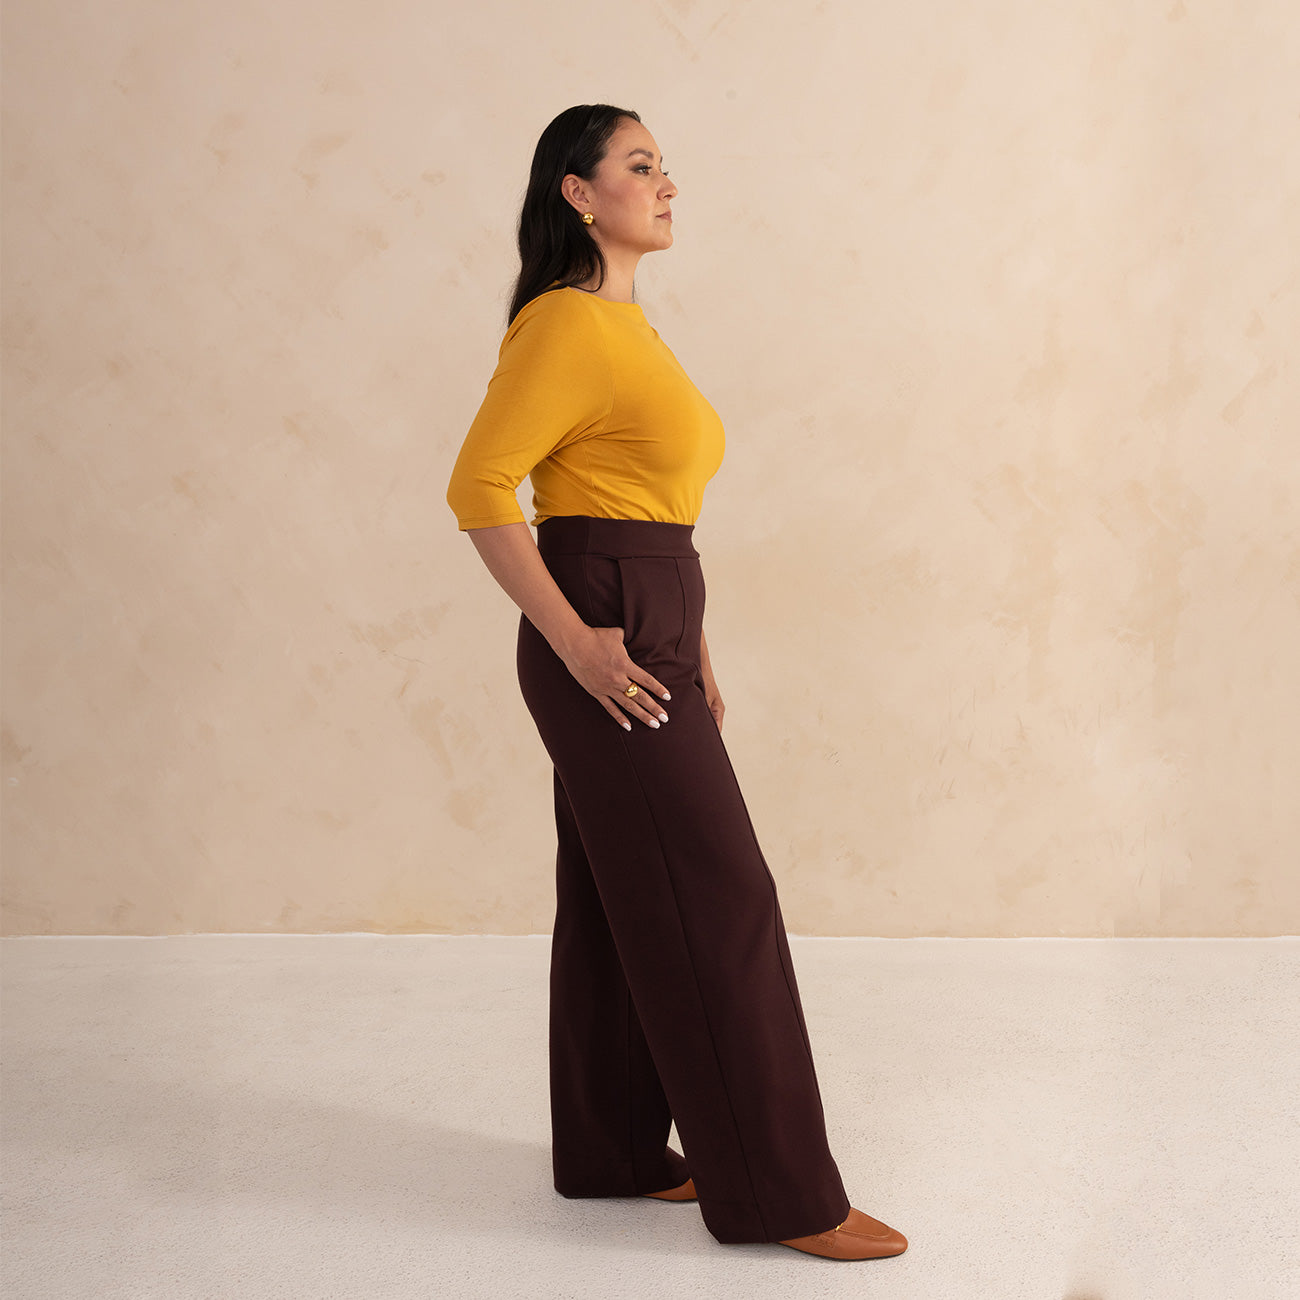 woman wearing a yellow 3/4 sleeve length and aubergine high waisted wide leg pants